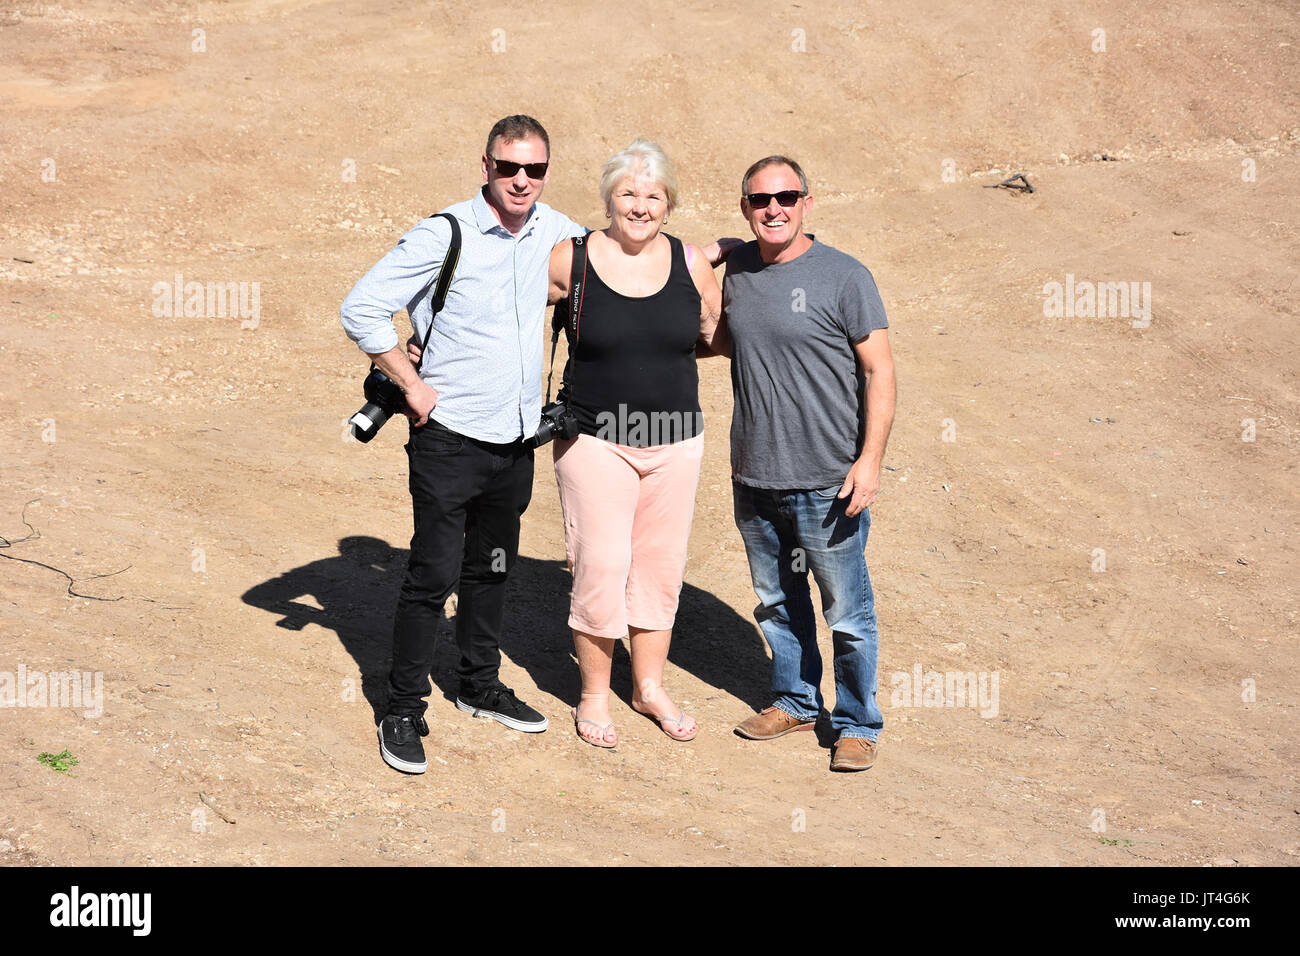 tourists in israel Stock Photo